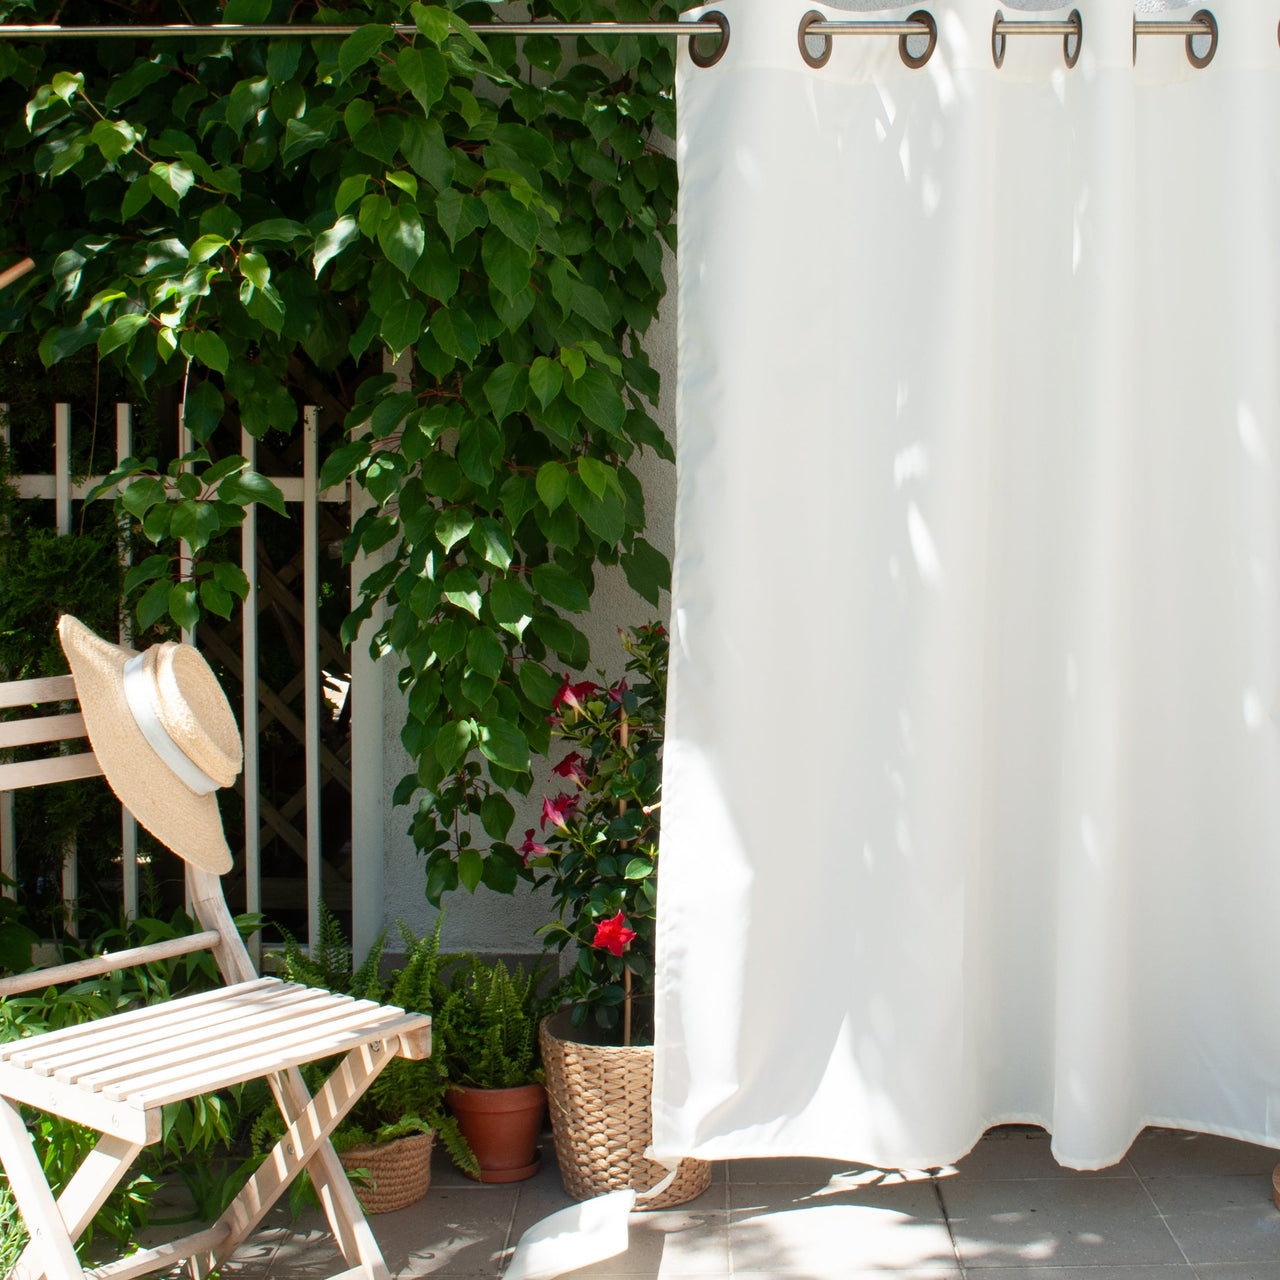 Outdoor Curtain with Weighted Bags on the Bottom - Grommet Top, Velcro Tabs or Sleeve Top, Heading: Metal Grommets